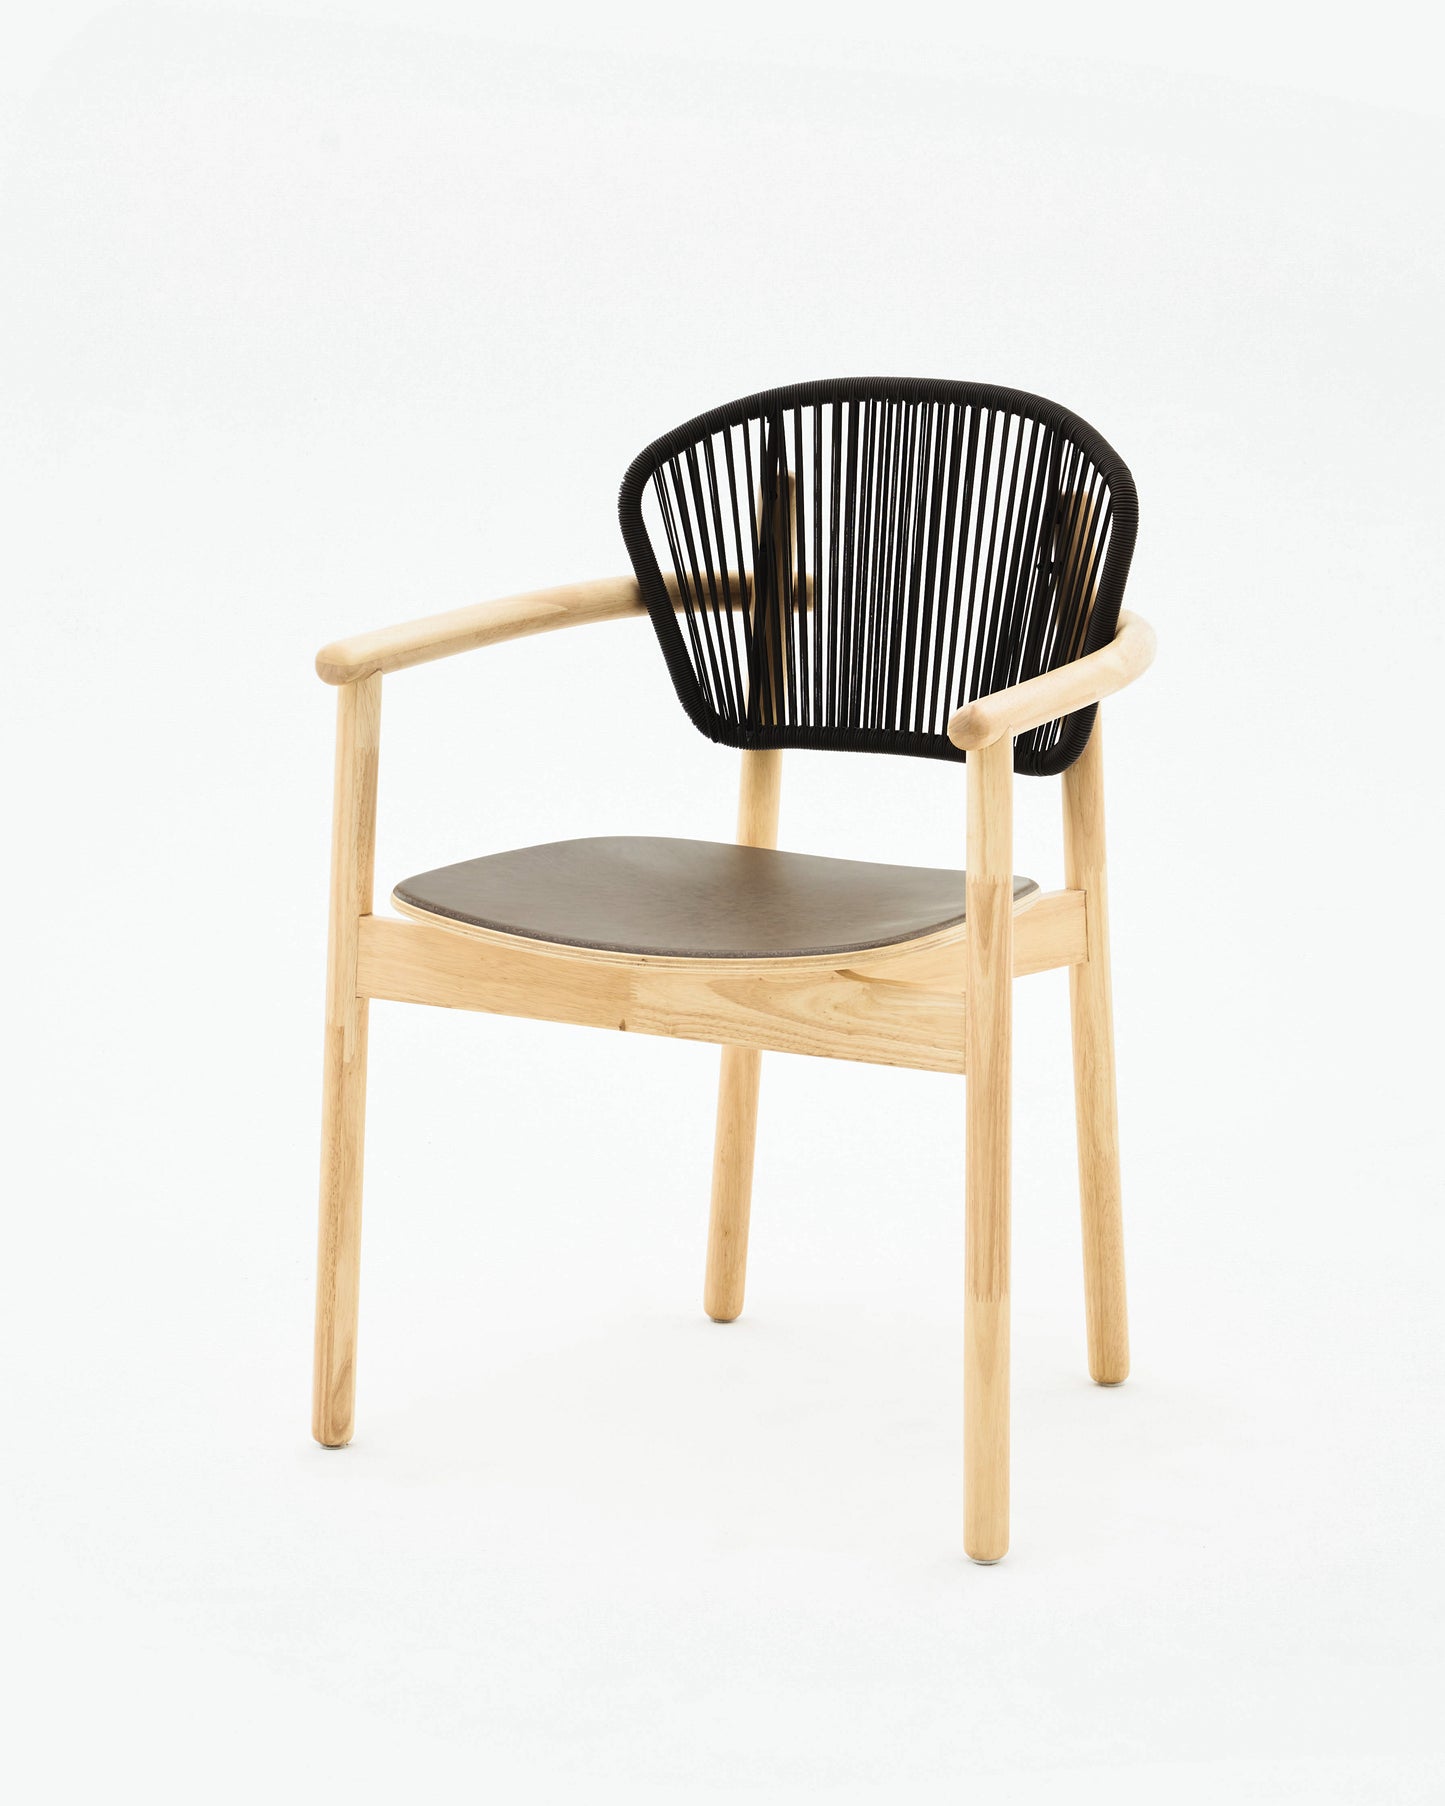 Woven Bound Chair